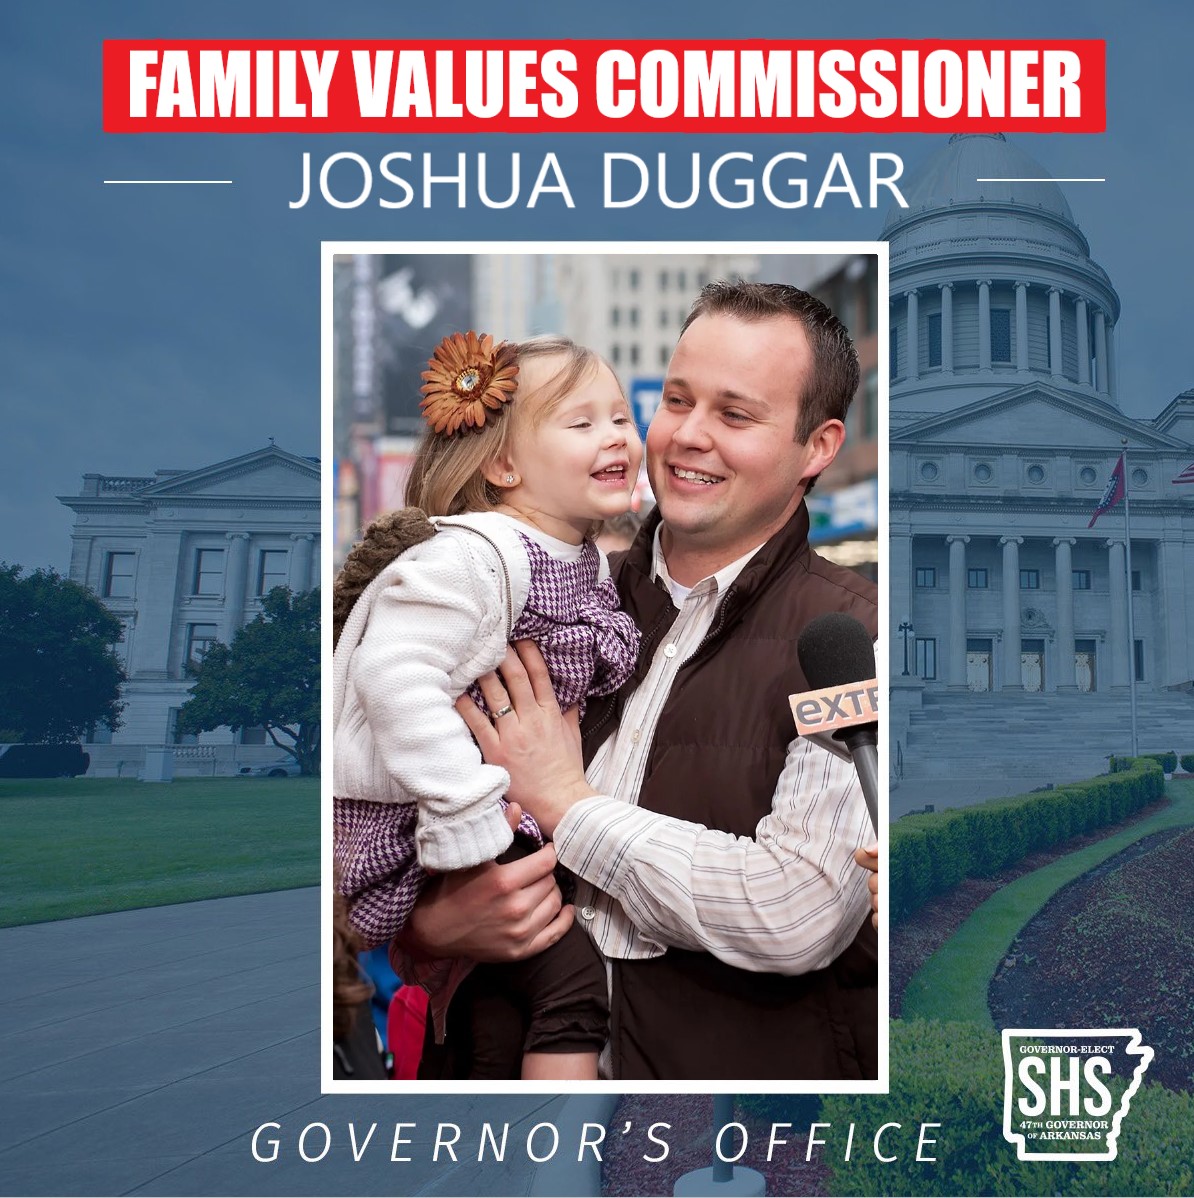 Our new Family Values Commission will help lead our removal of CRT from classrooms, our ban on public drag shows, and our pushback against China/TikTok harvesting our children's data. Happy to appoint as commissioner the #1 expert on Arkansas family values, Josh Duggar!